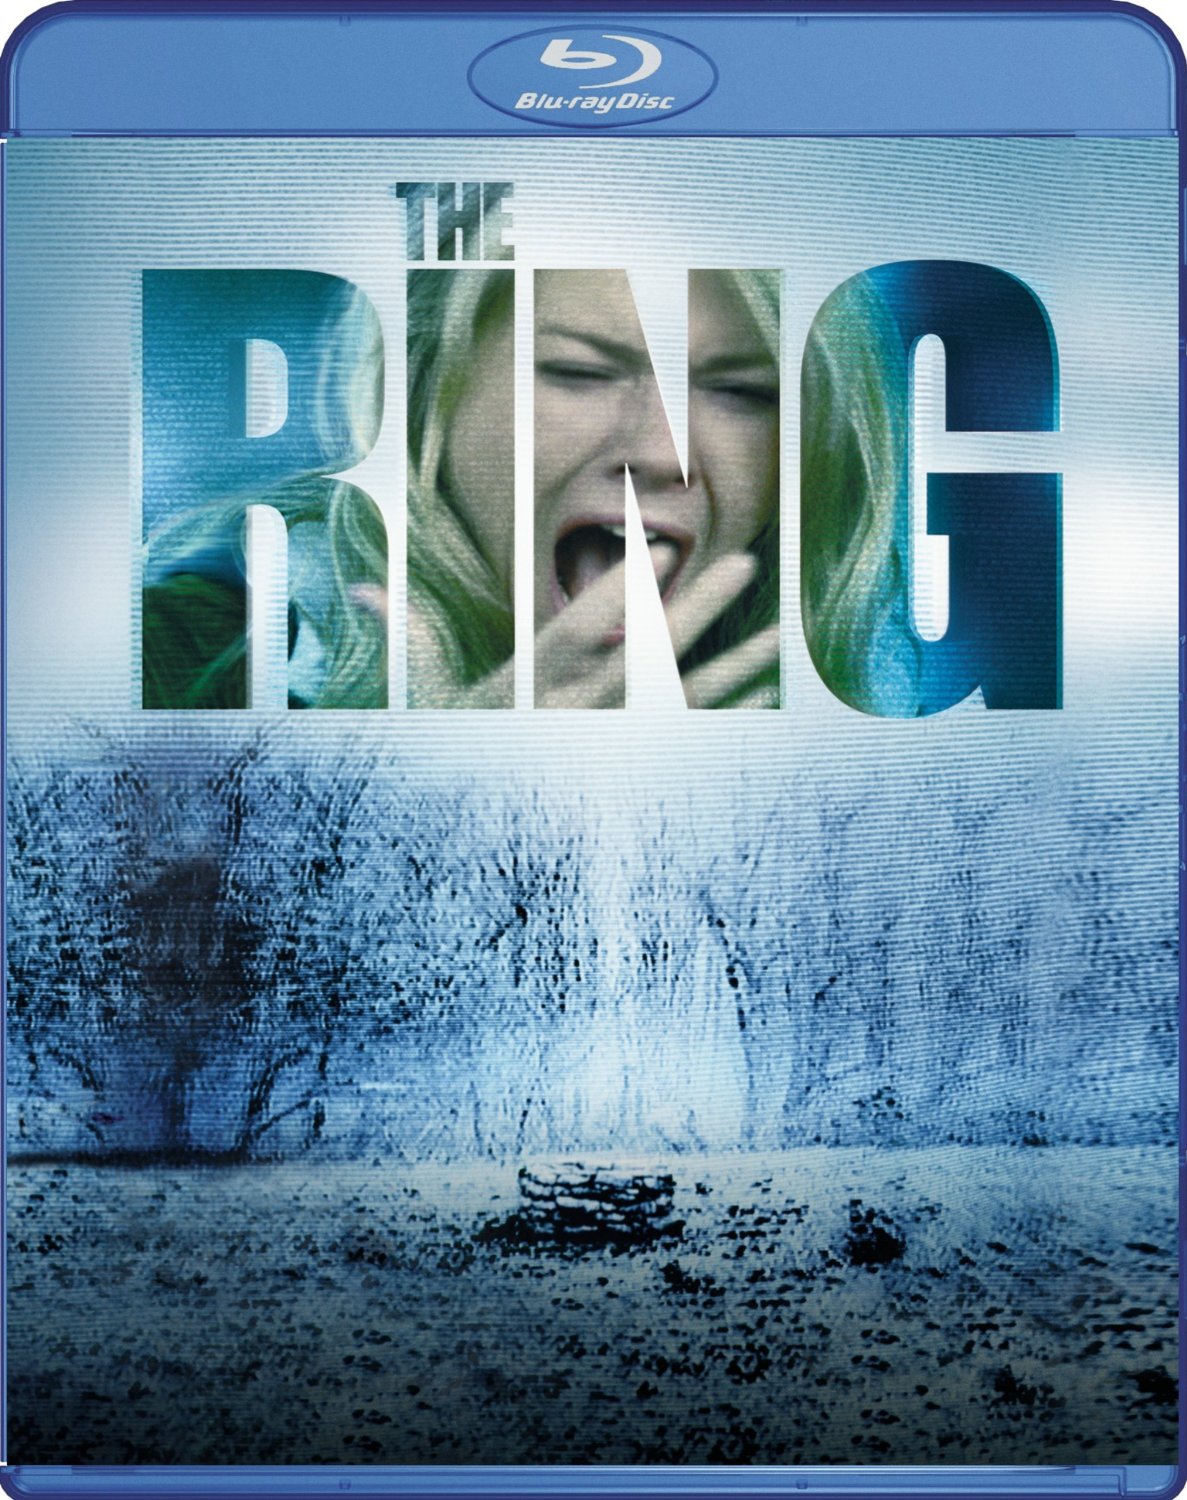 Ring, The